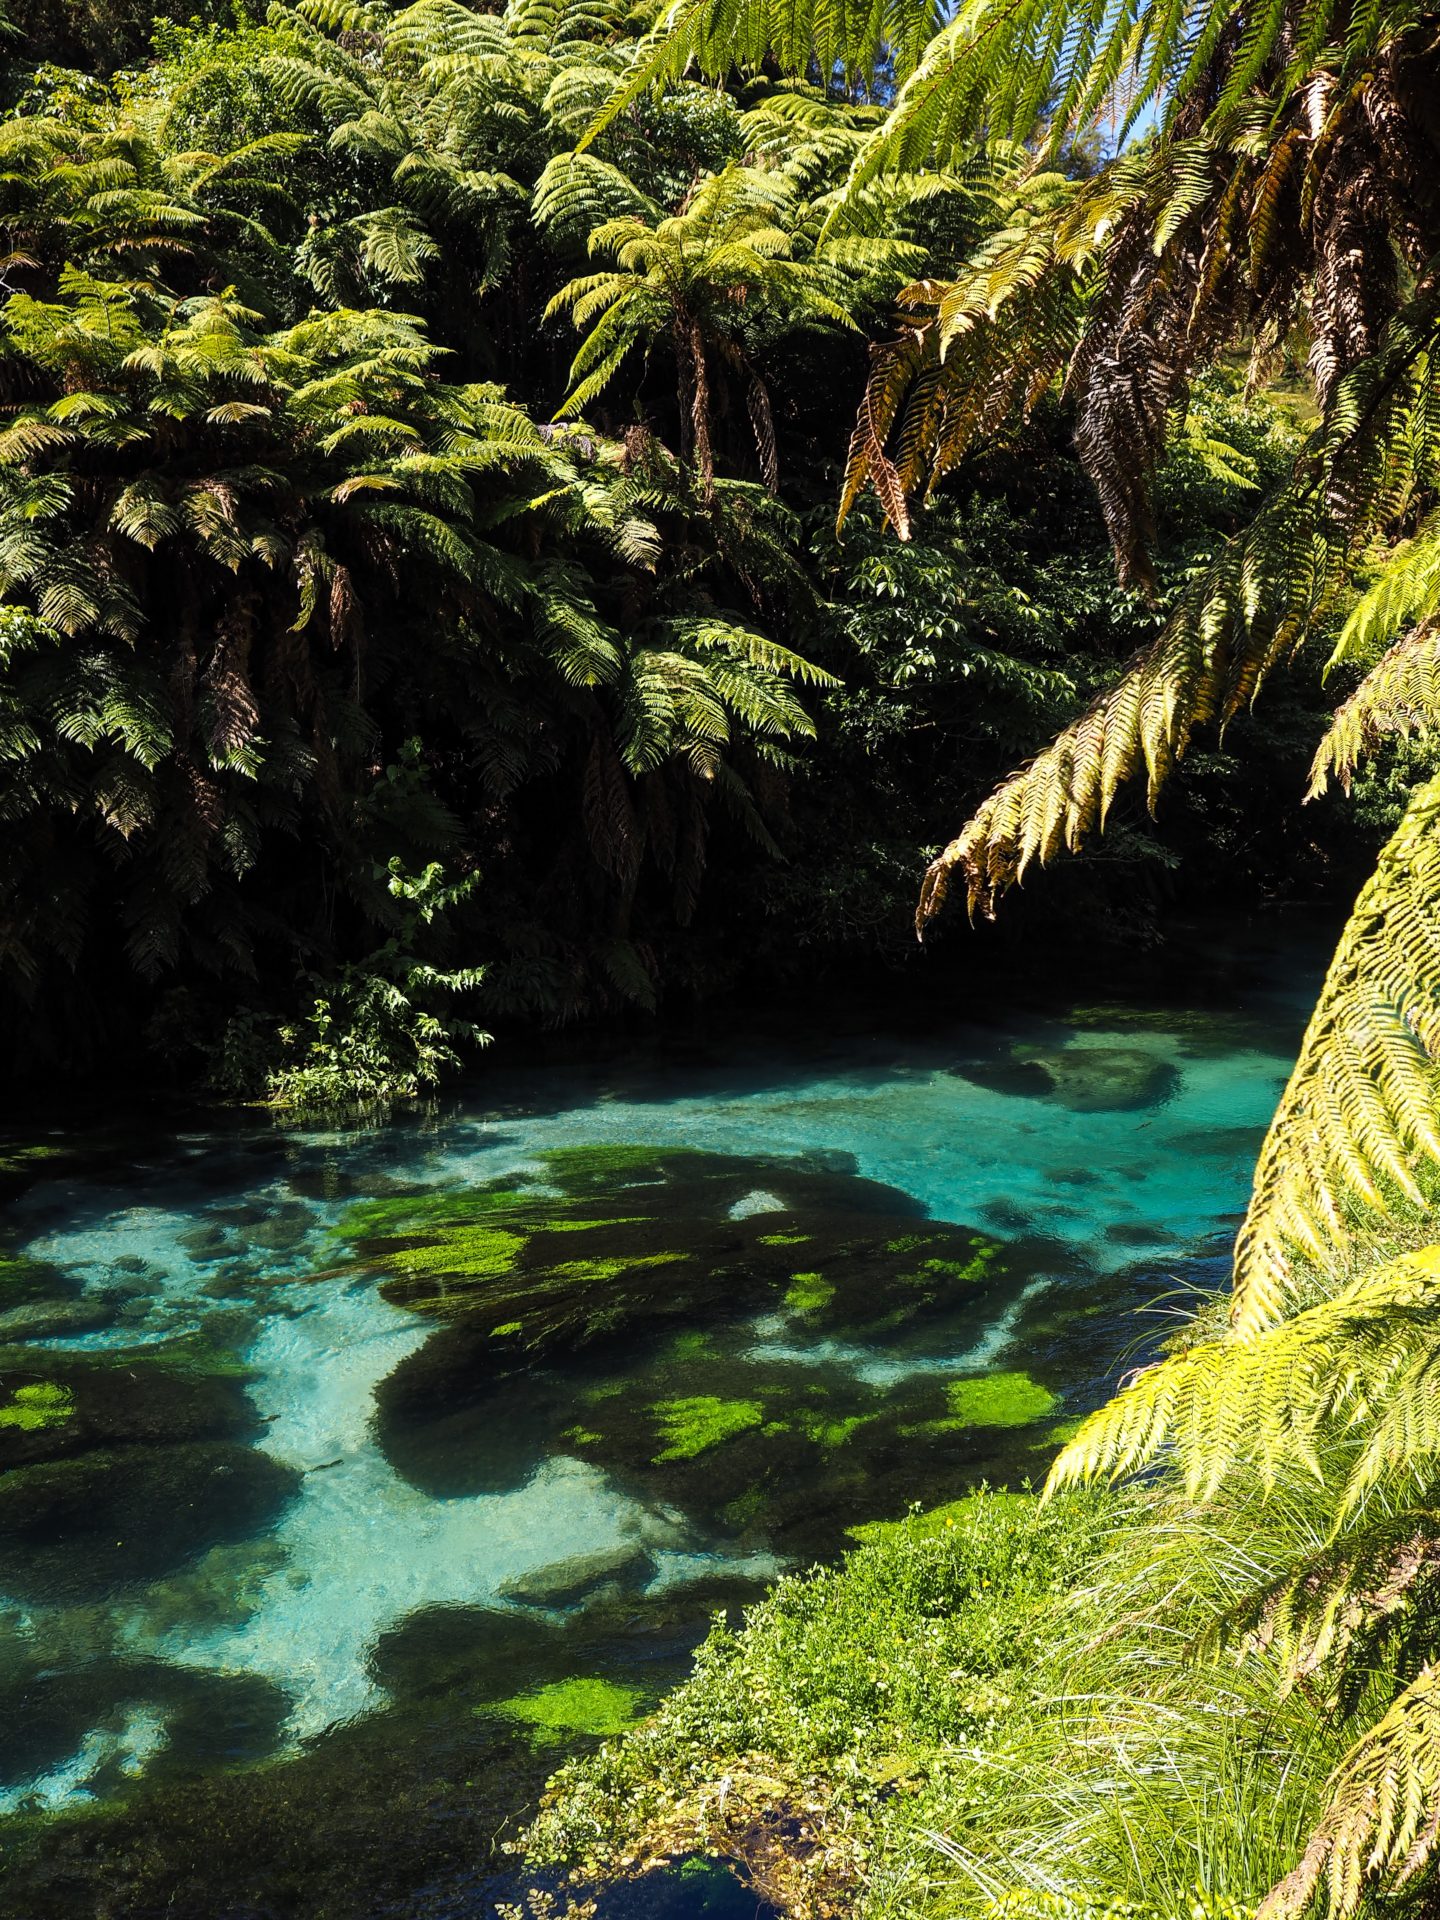 New Zealand Travel InspirationVisiting the Blue Springs Putaruru & the Te Waihou Walkway; a truly beautiful walk in the North Island with crystal clear water. #travel #newzealand #80pairsofshoes